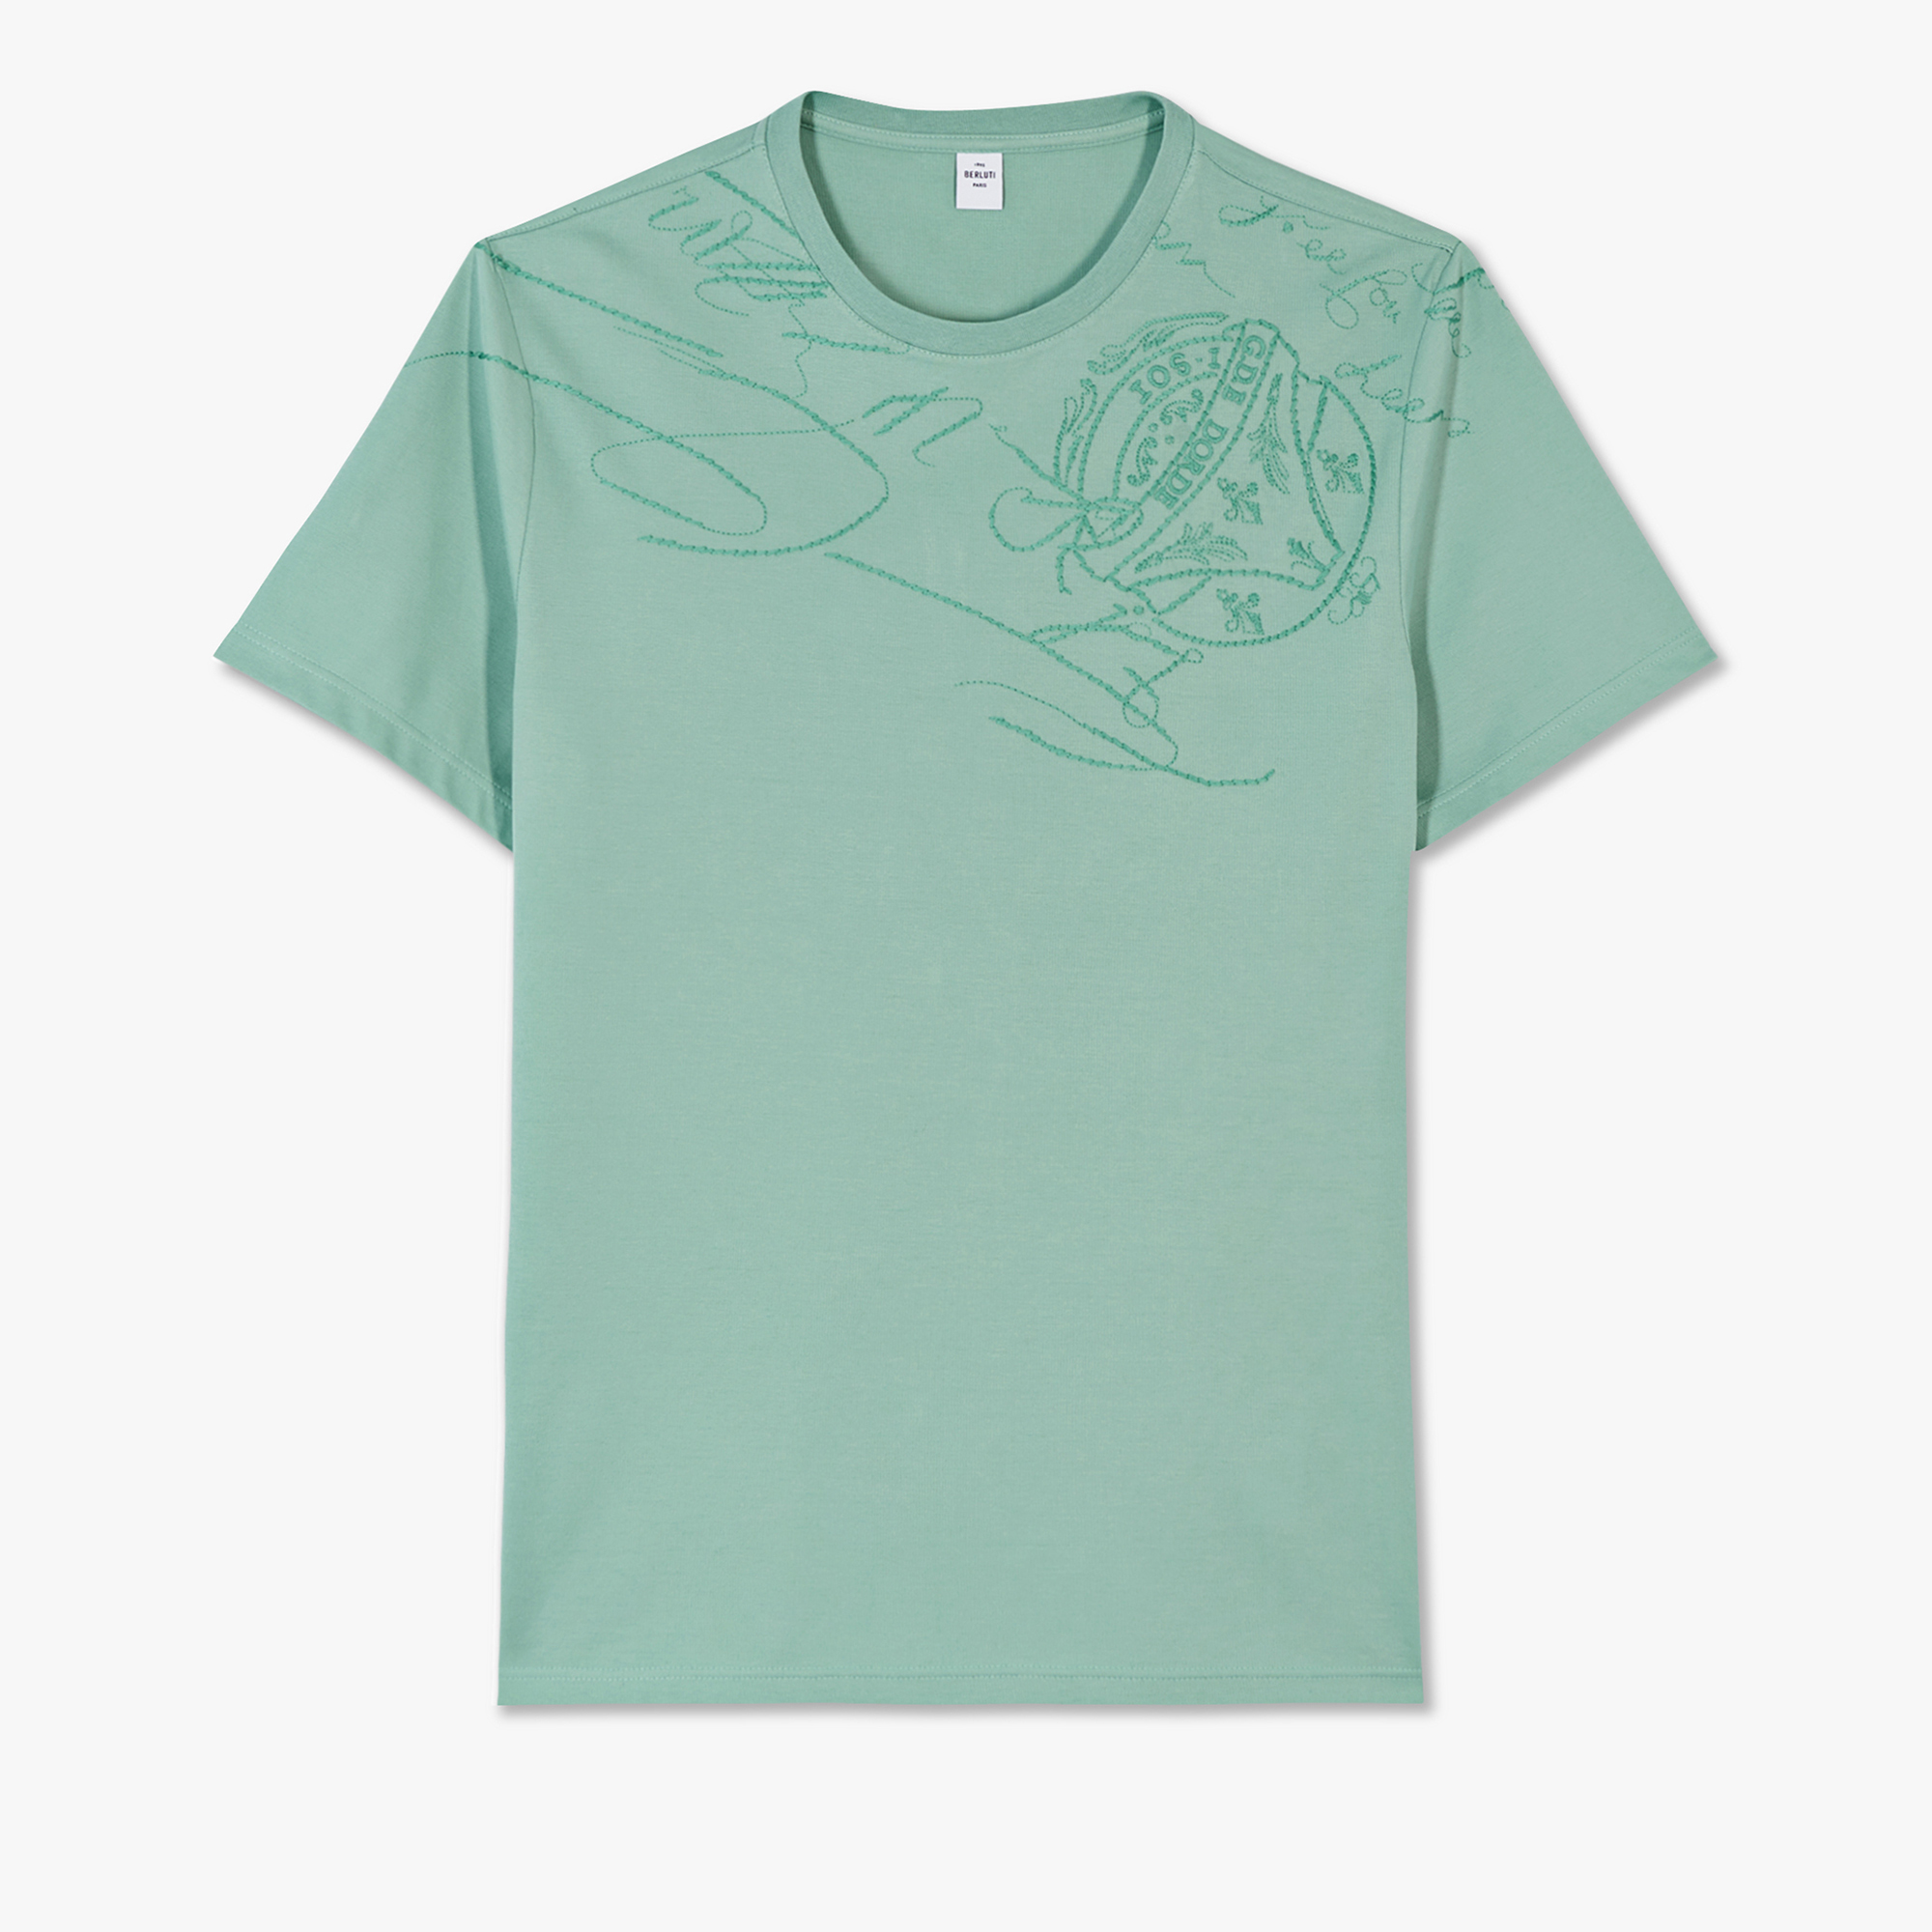 Embroidered Scritto T-Shirt, ALMOND GREEN, hi-res